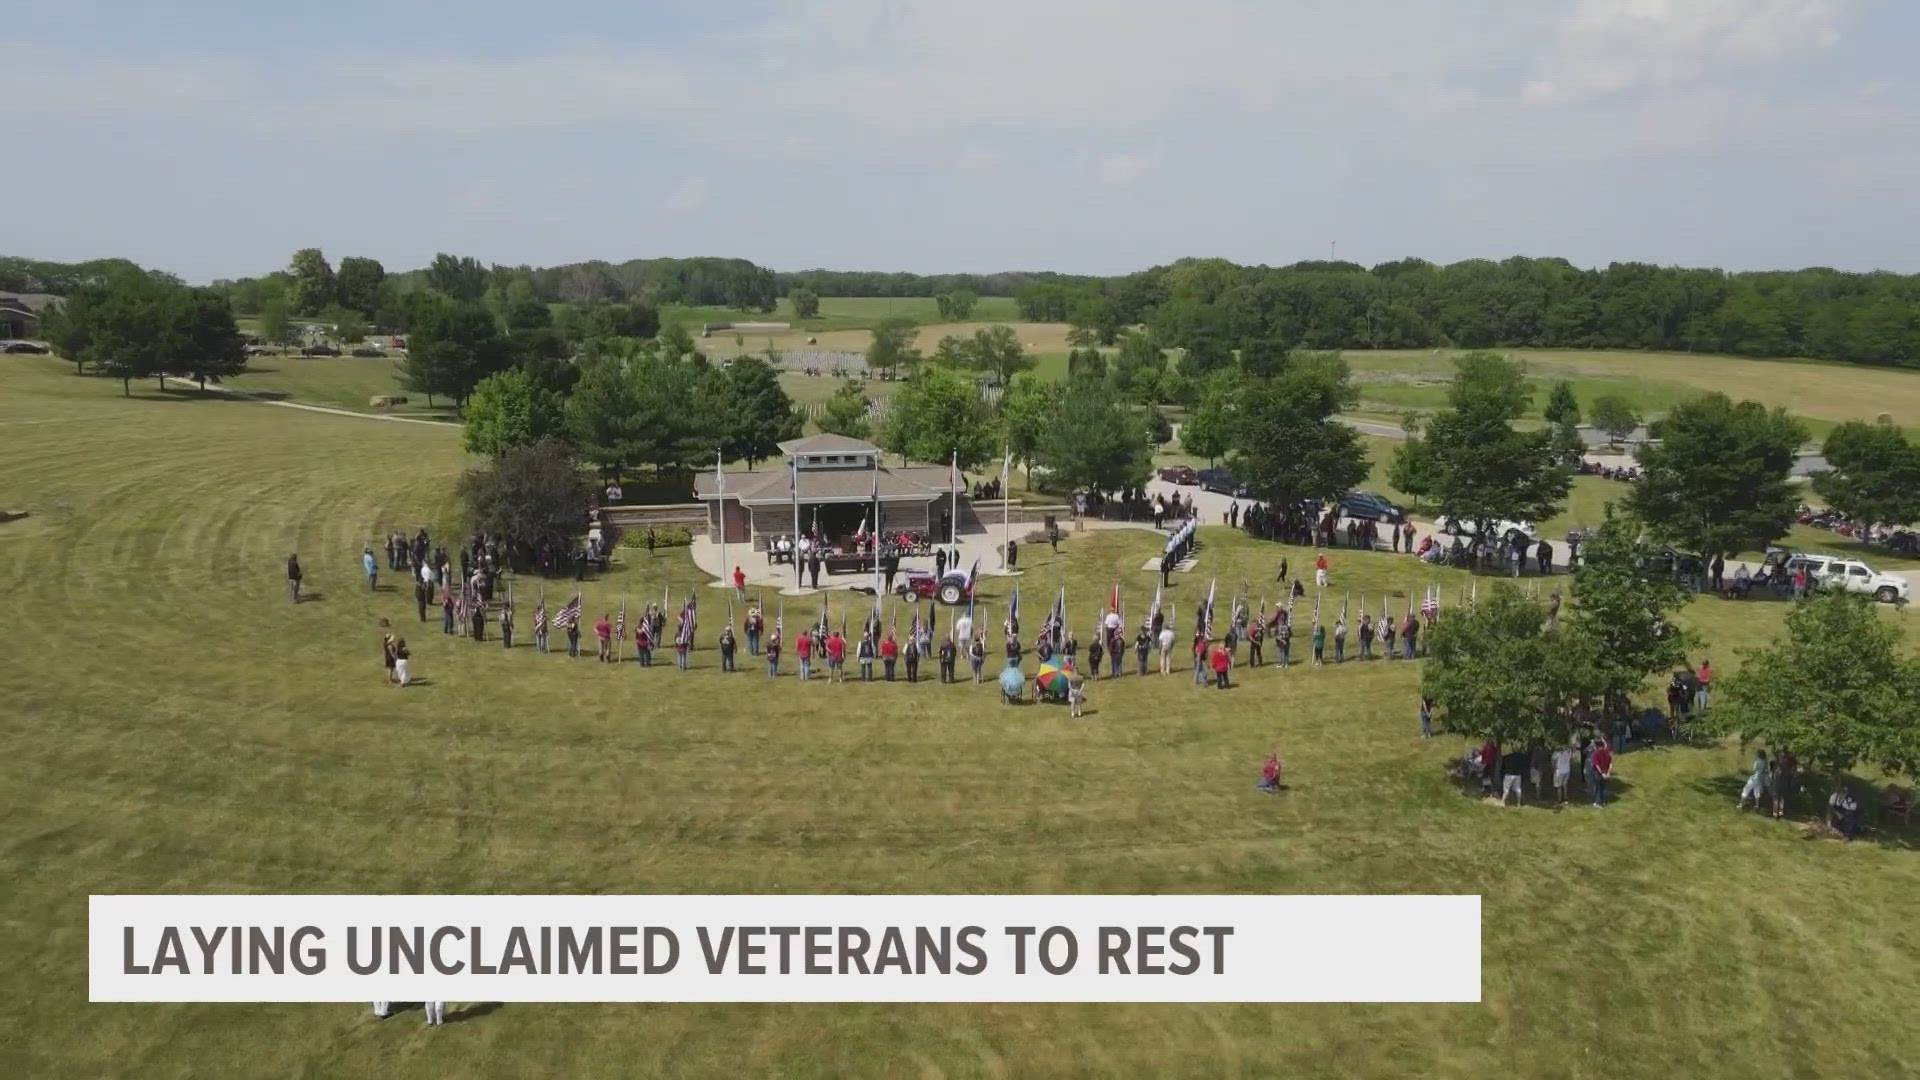 The unclaimed veterans and spouses were honored at Hamilton's Funeral & After Life Services and later laid to rest at Iowa Veteran's Cemetery.